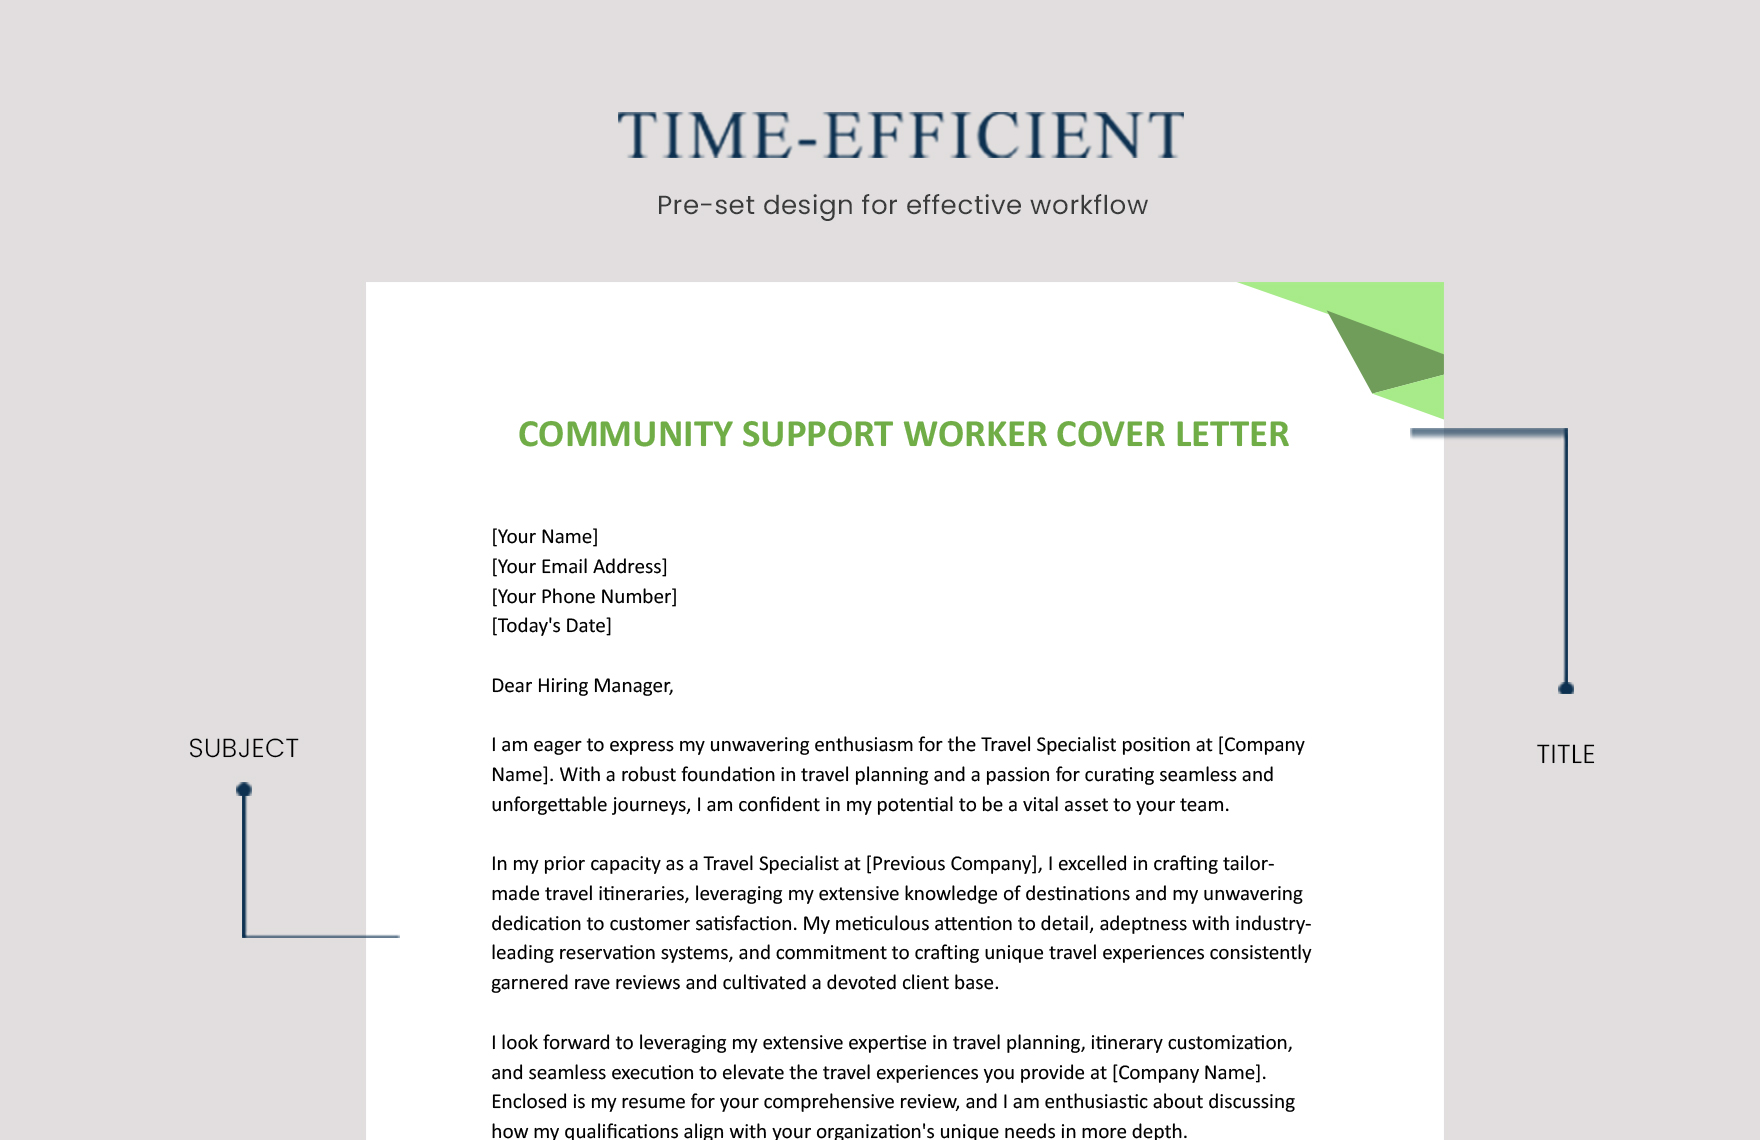 Community Support Worker Cover Letter